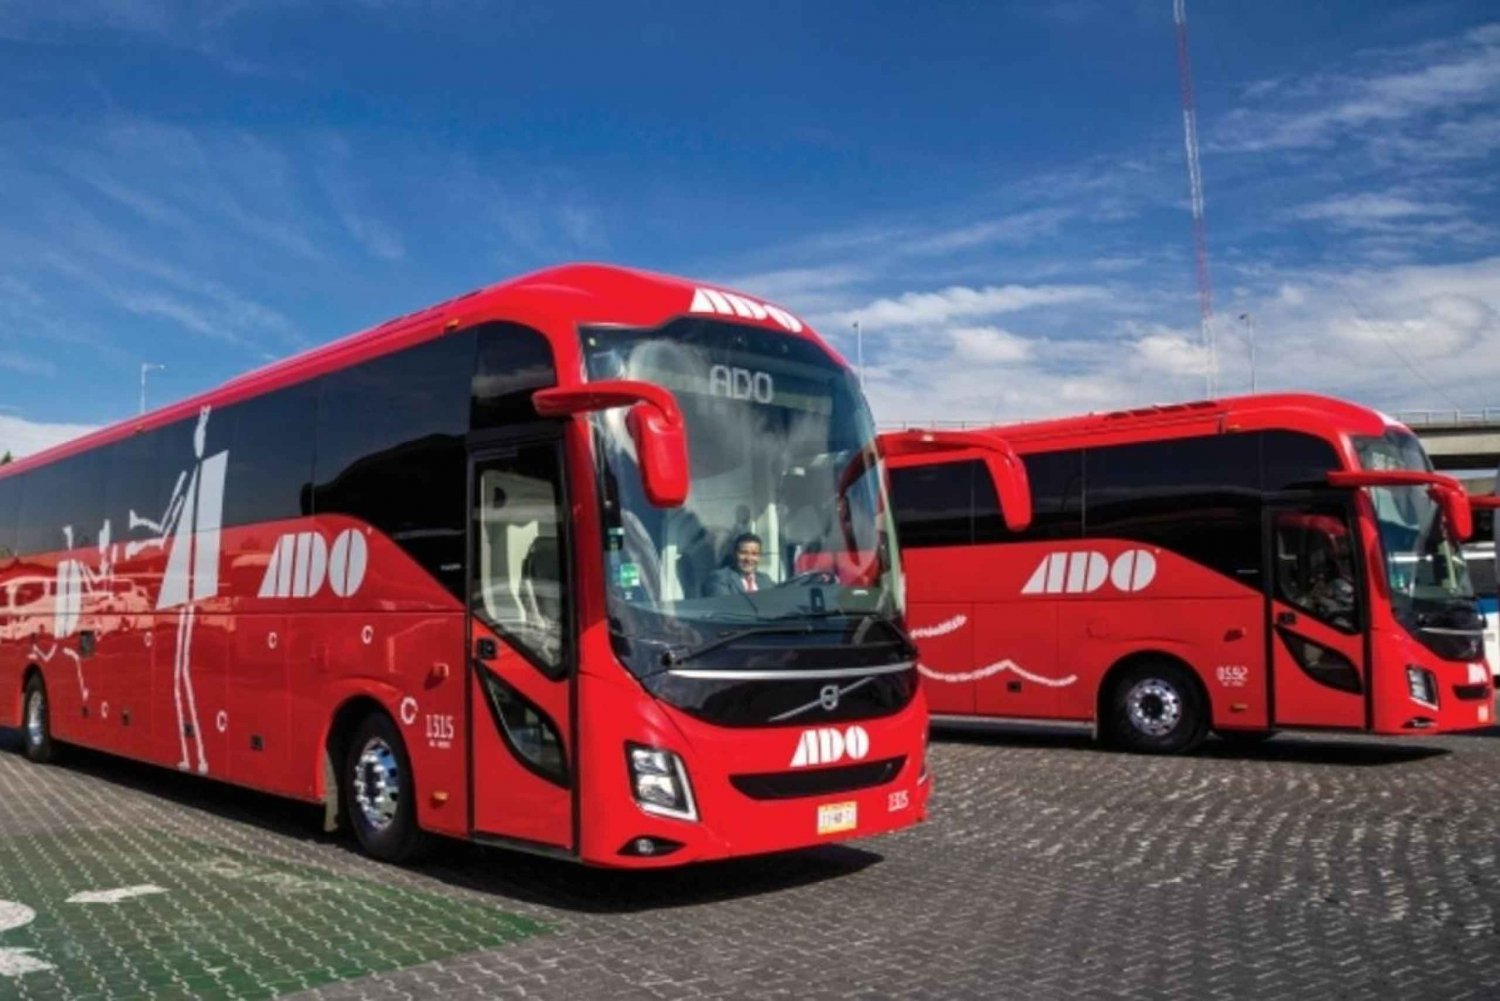 Cancun: Airport Transfer to/from Downtown by Bus